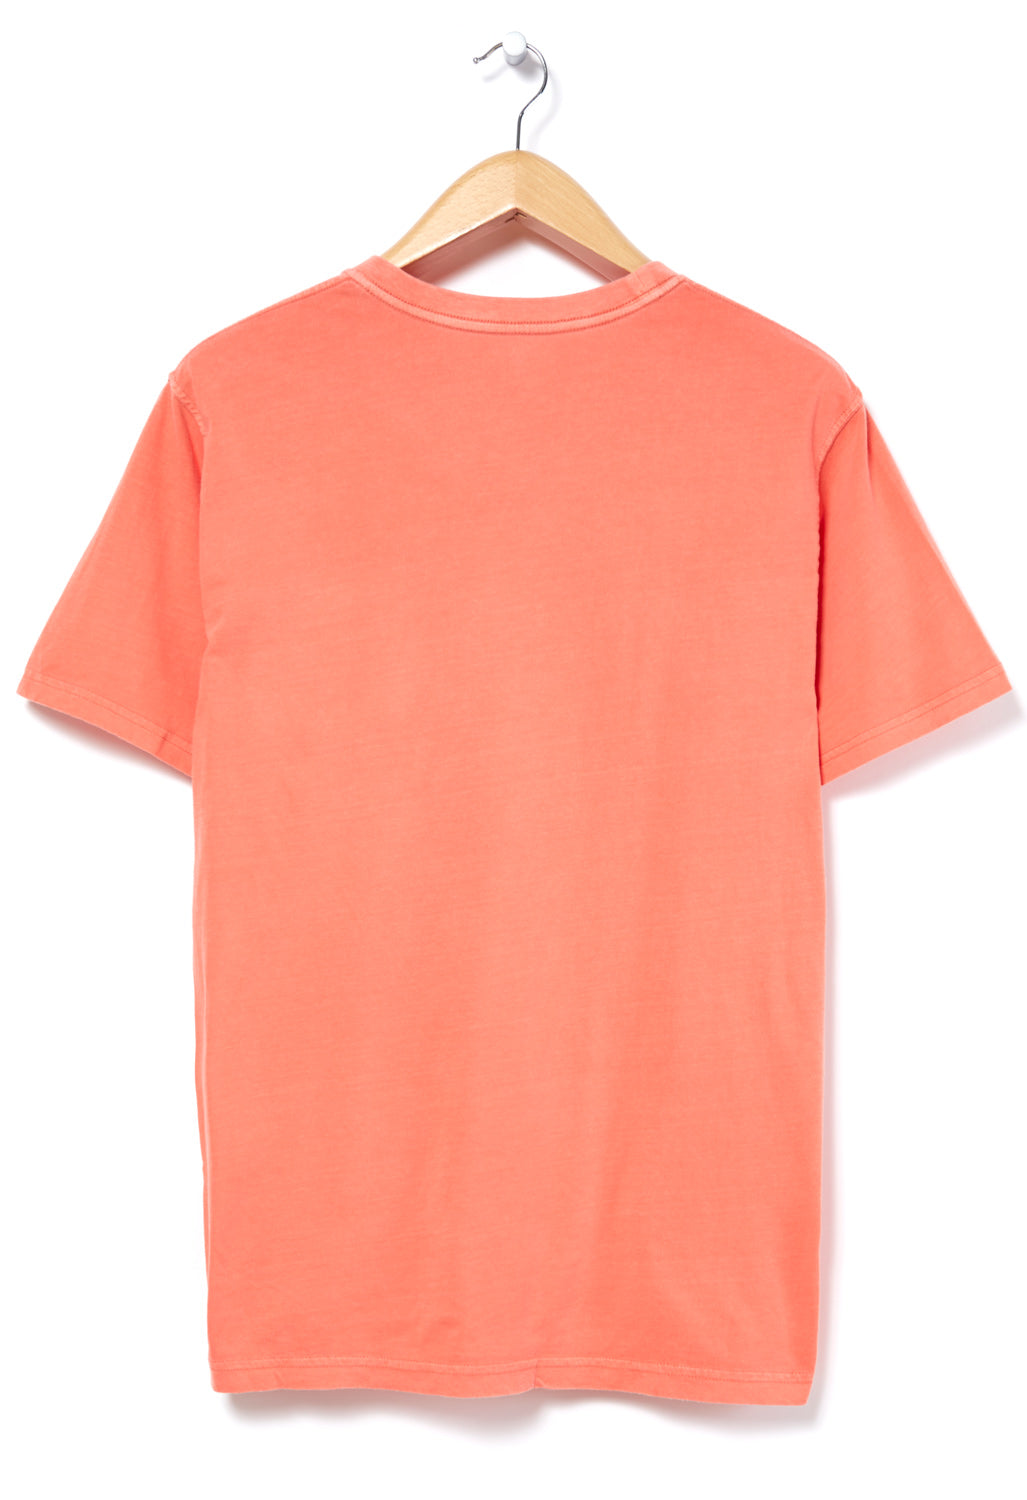 Montbell Men's Wash Out Cotton T-Shirt - Coral Pink